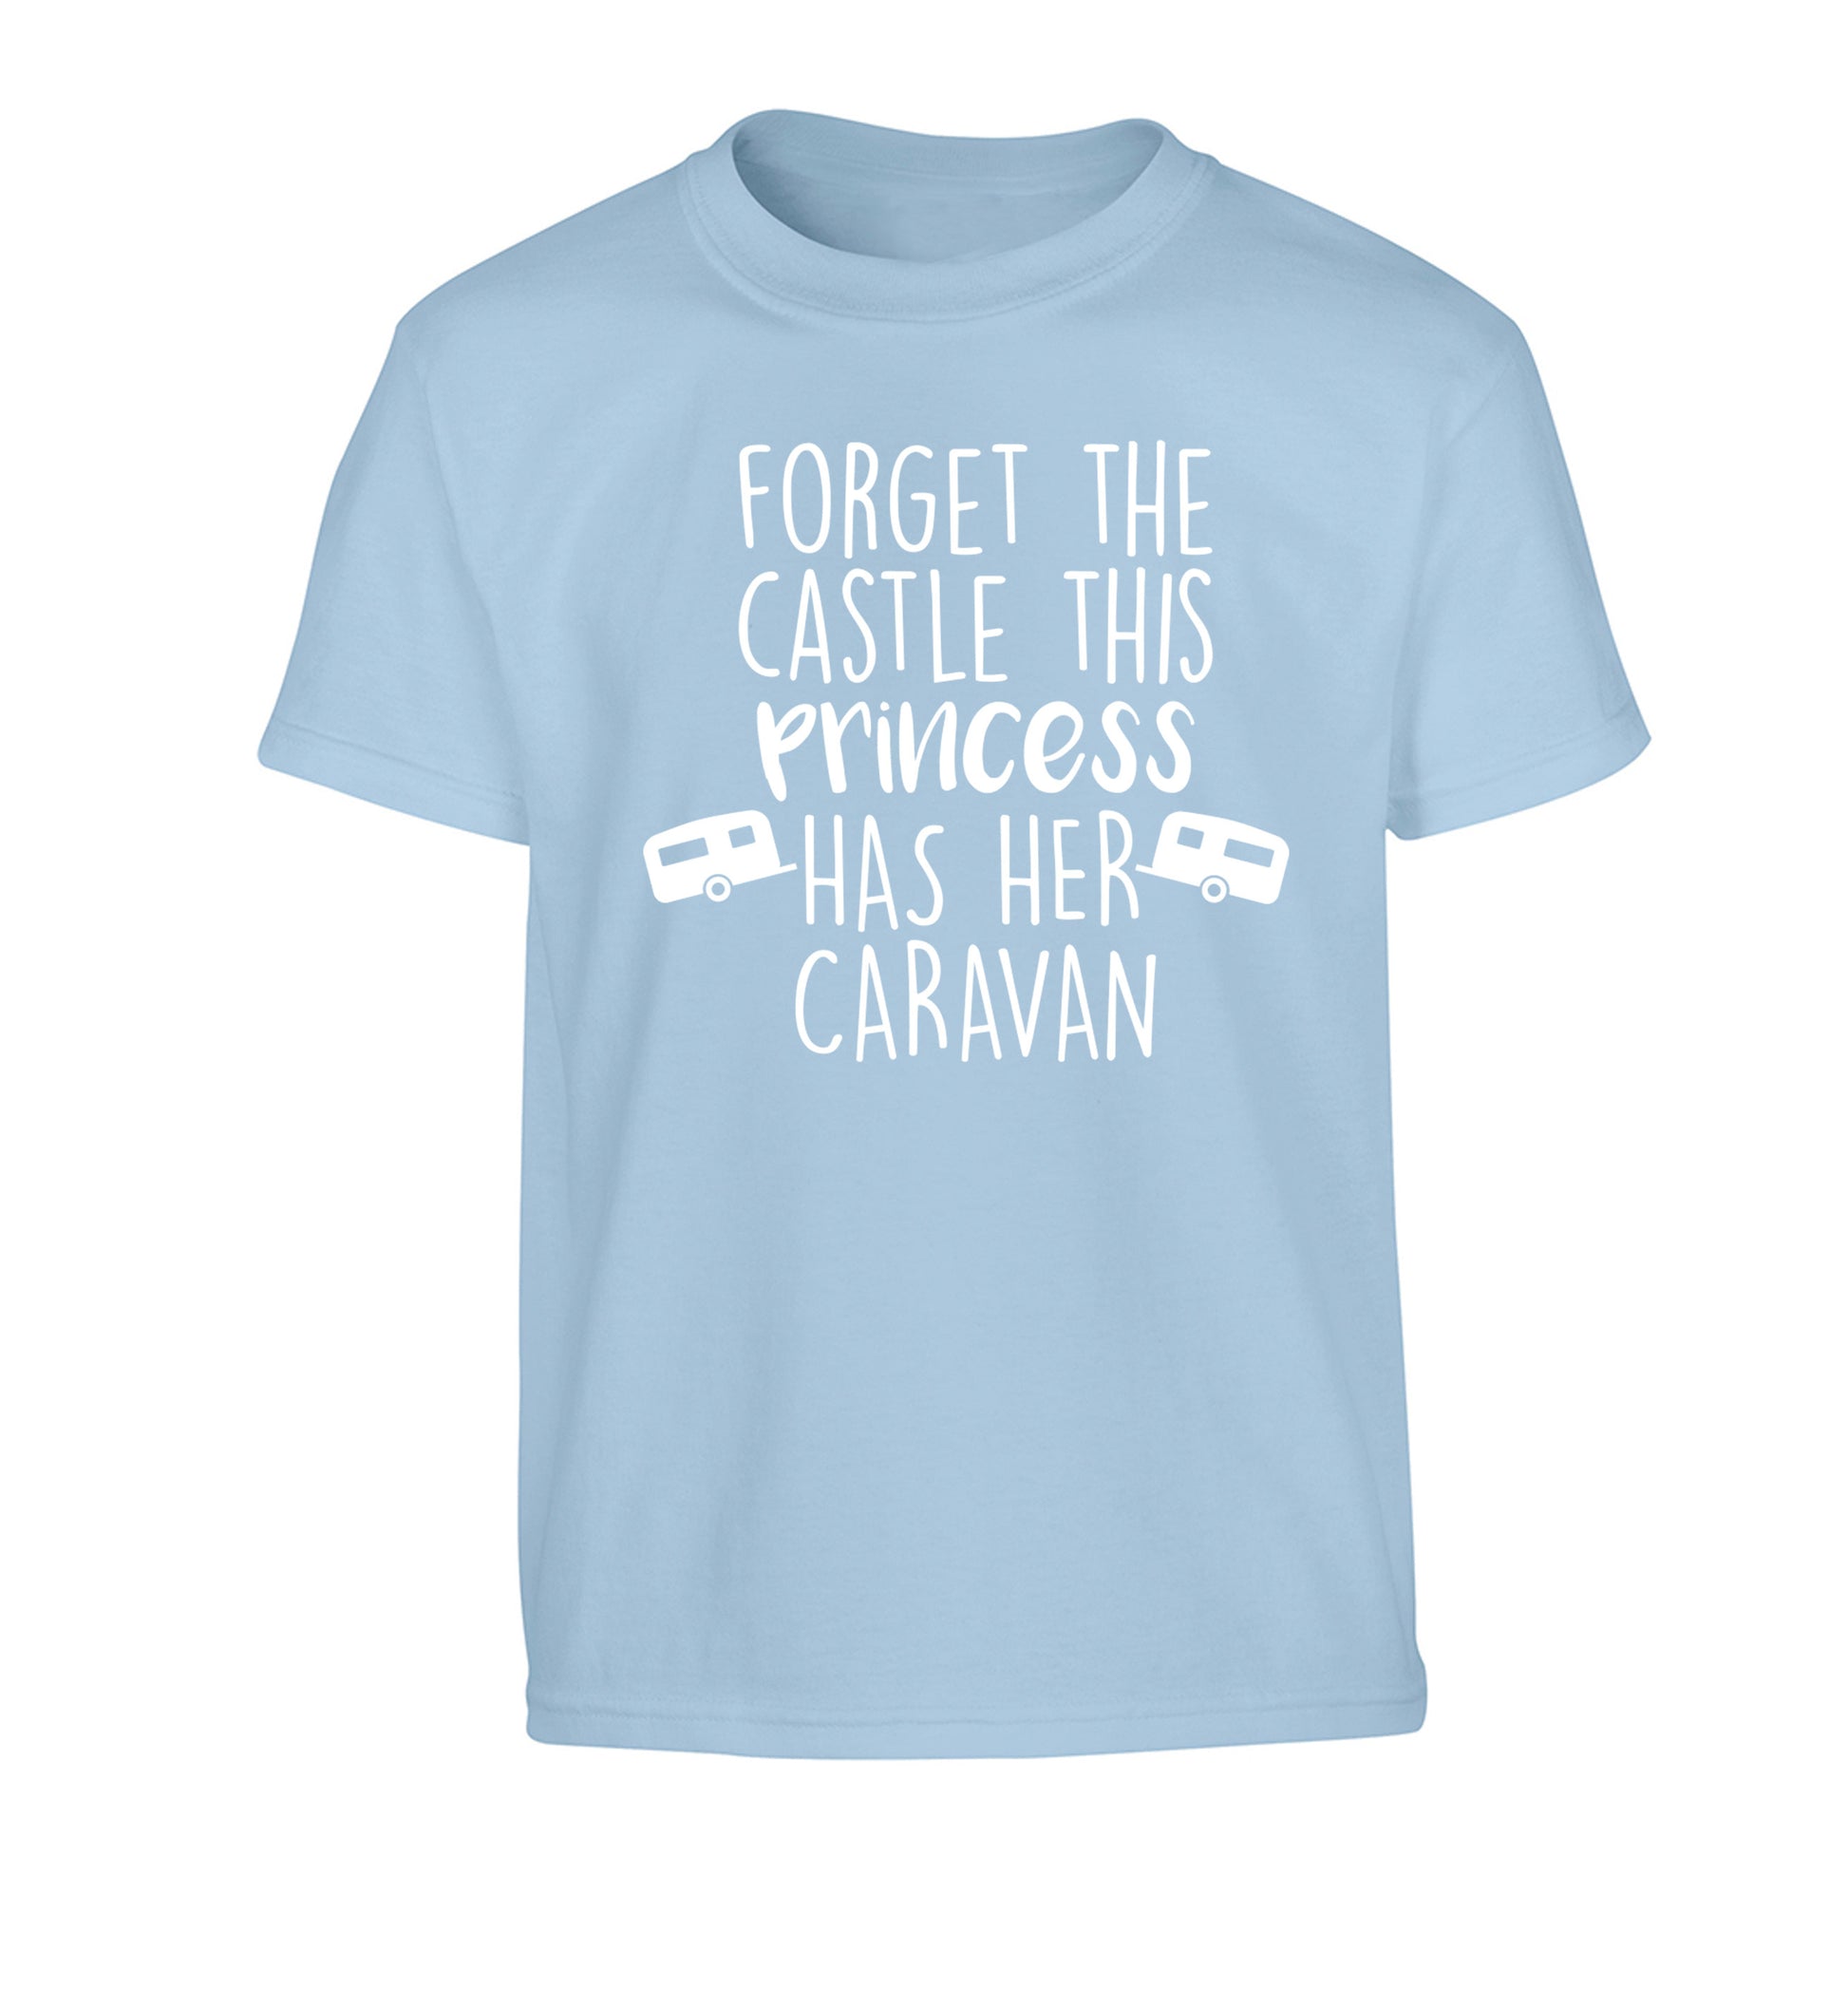 Forget the castle this princess lives at the caravan Children's light blue Tshirt 12-14 Years